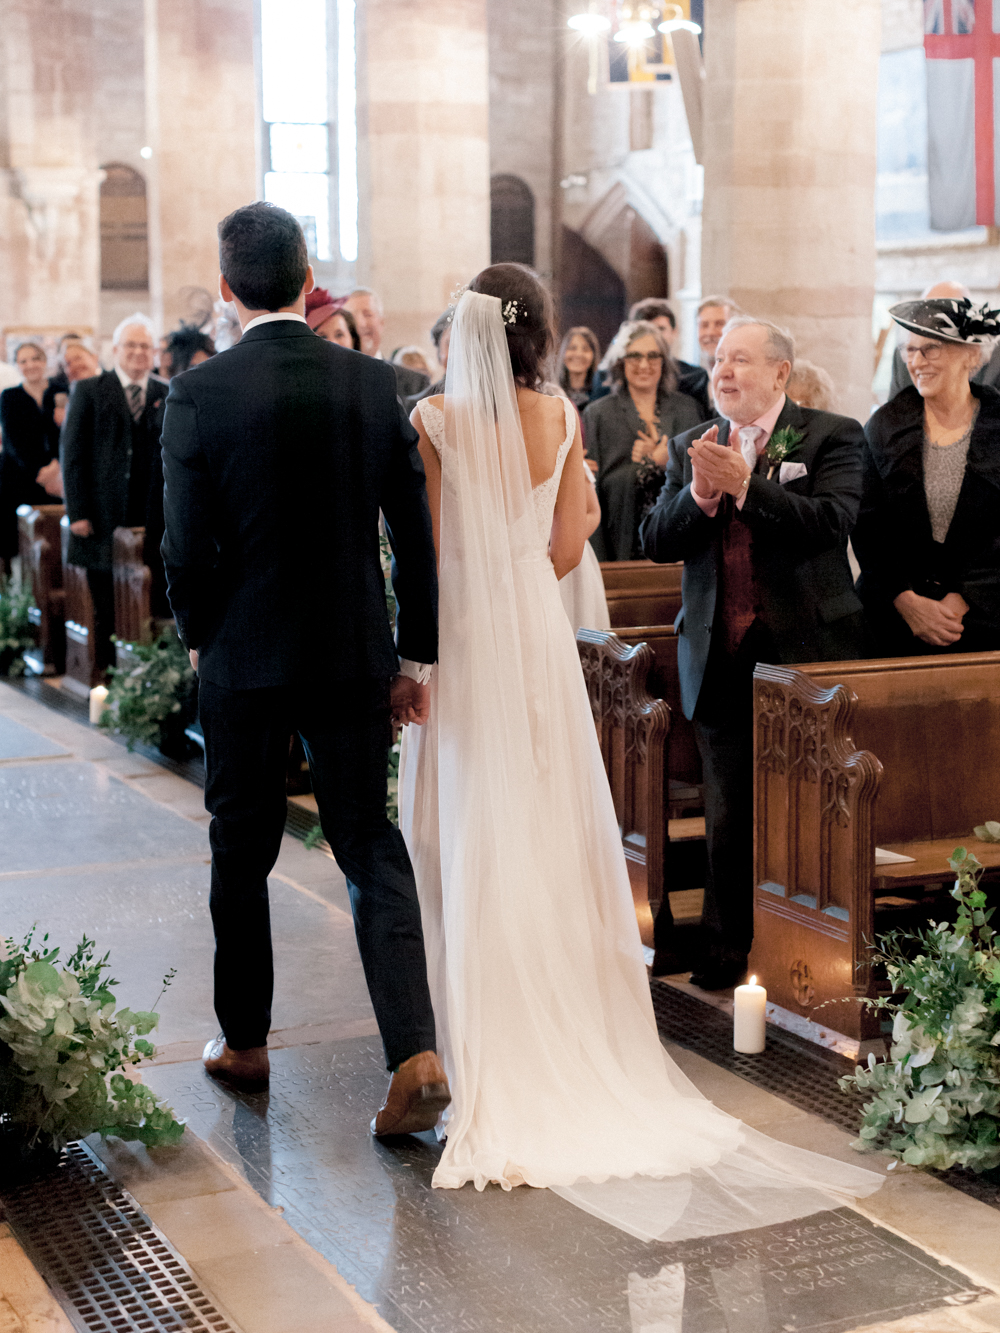 View of Bride and Groom walking up the aisle at their romantic church wedding in the Cotswolds